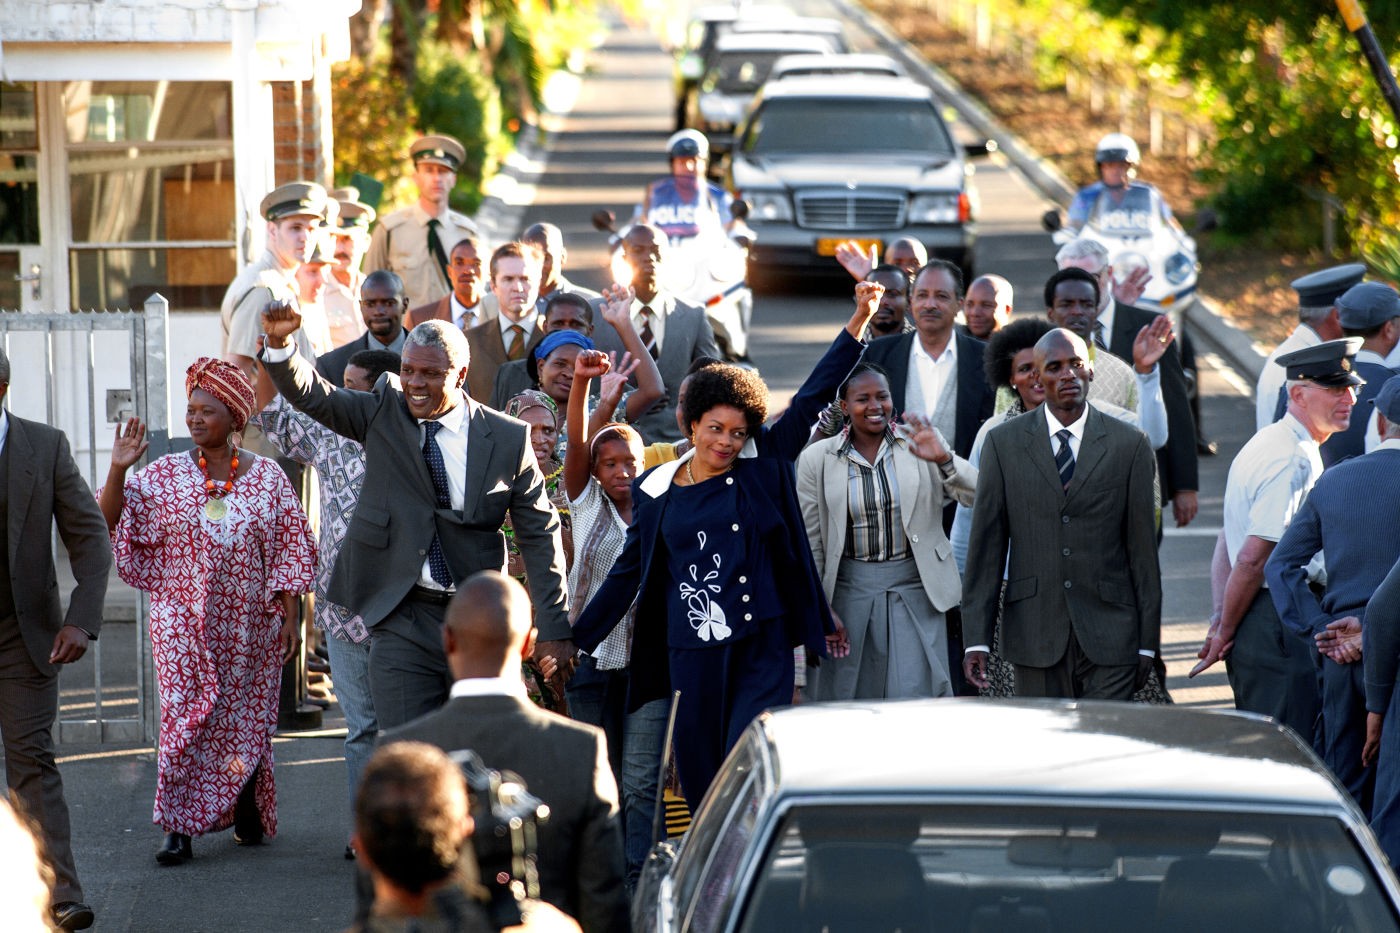 A scene from The Weinstein Company's' Mandela: Long Walk to Freedom (2013)